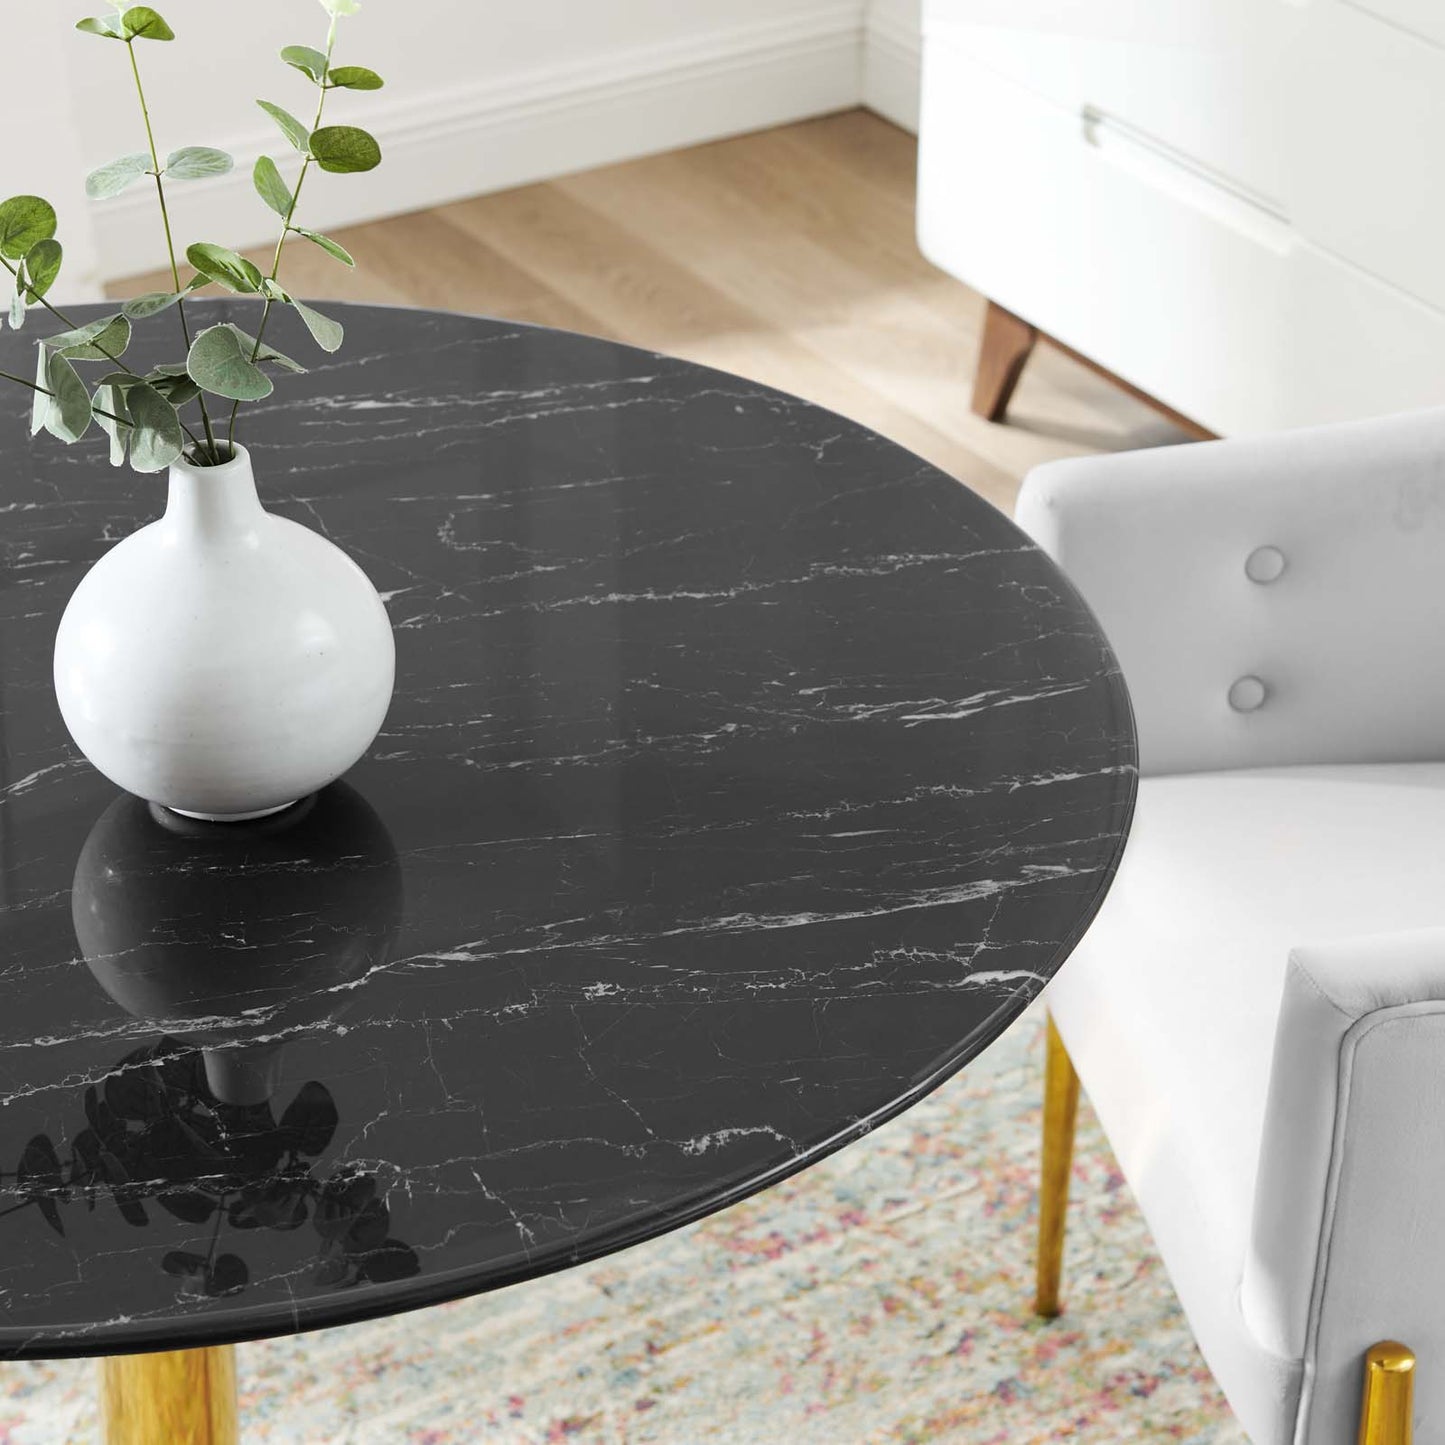 Verne 40" Artificial Marble Dining Table Gold Black EEI-4757-GLD-BLK